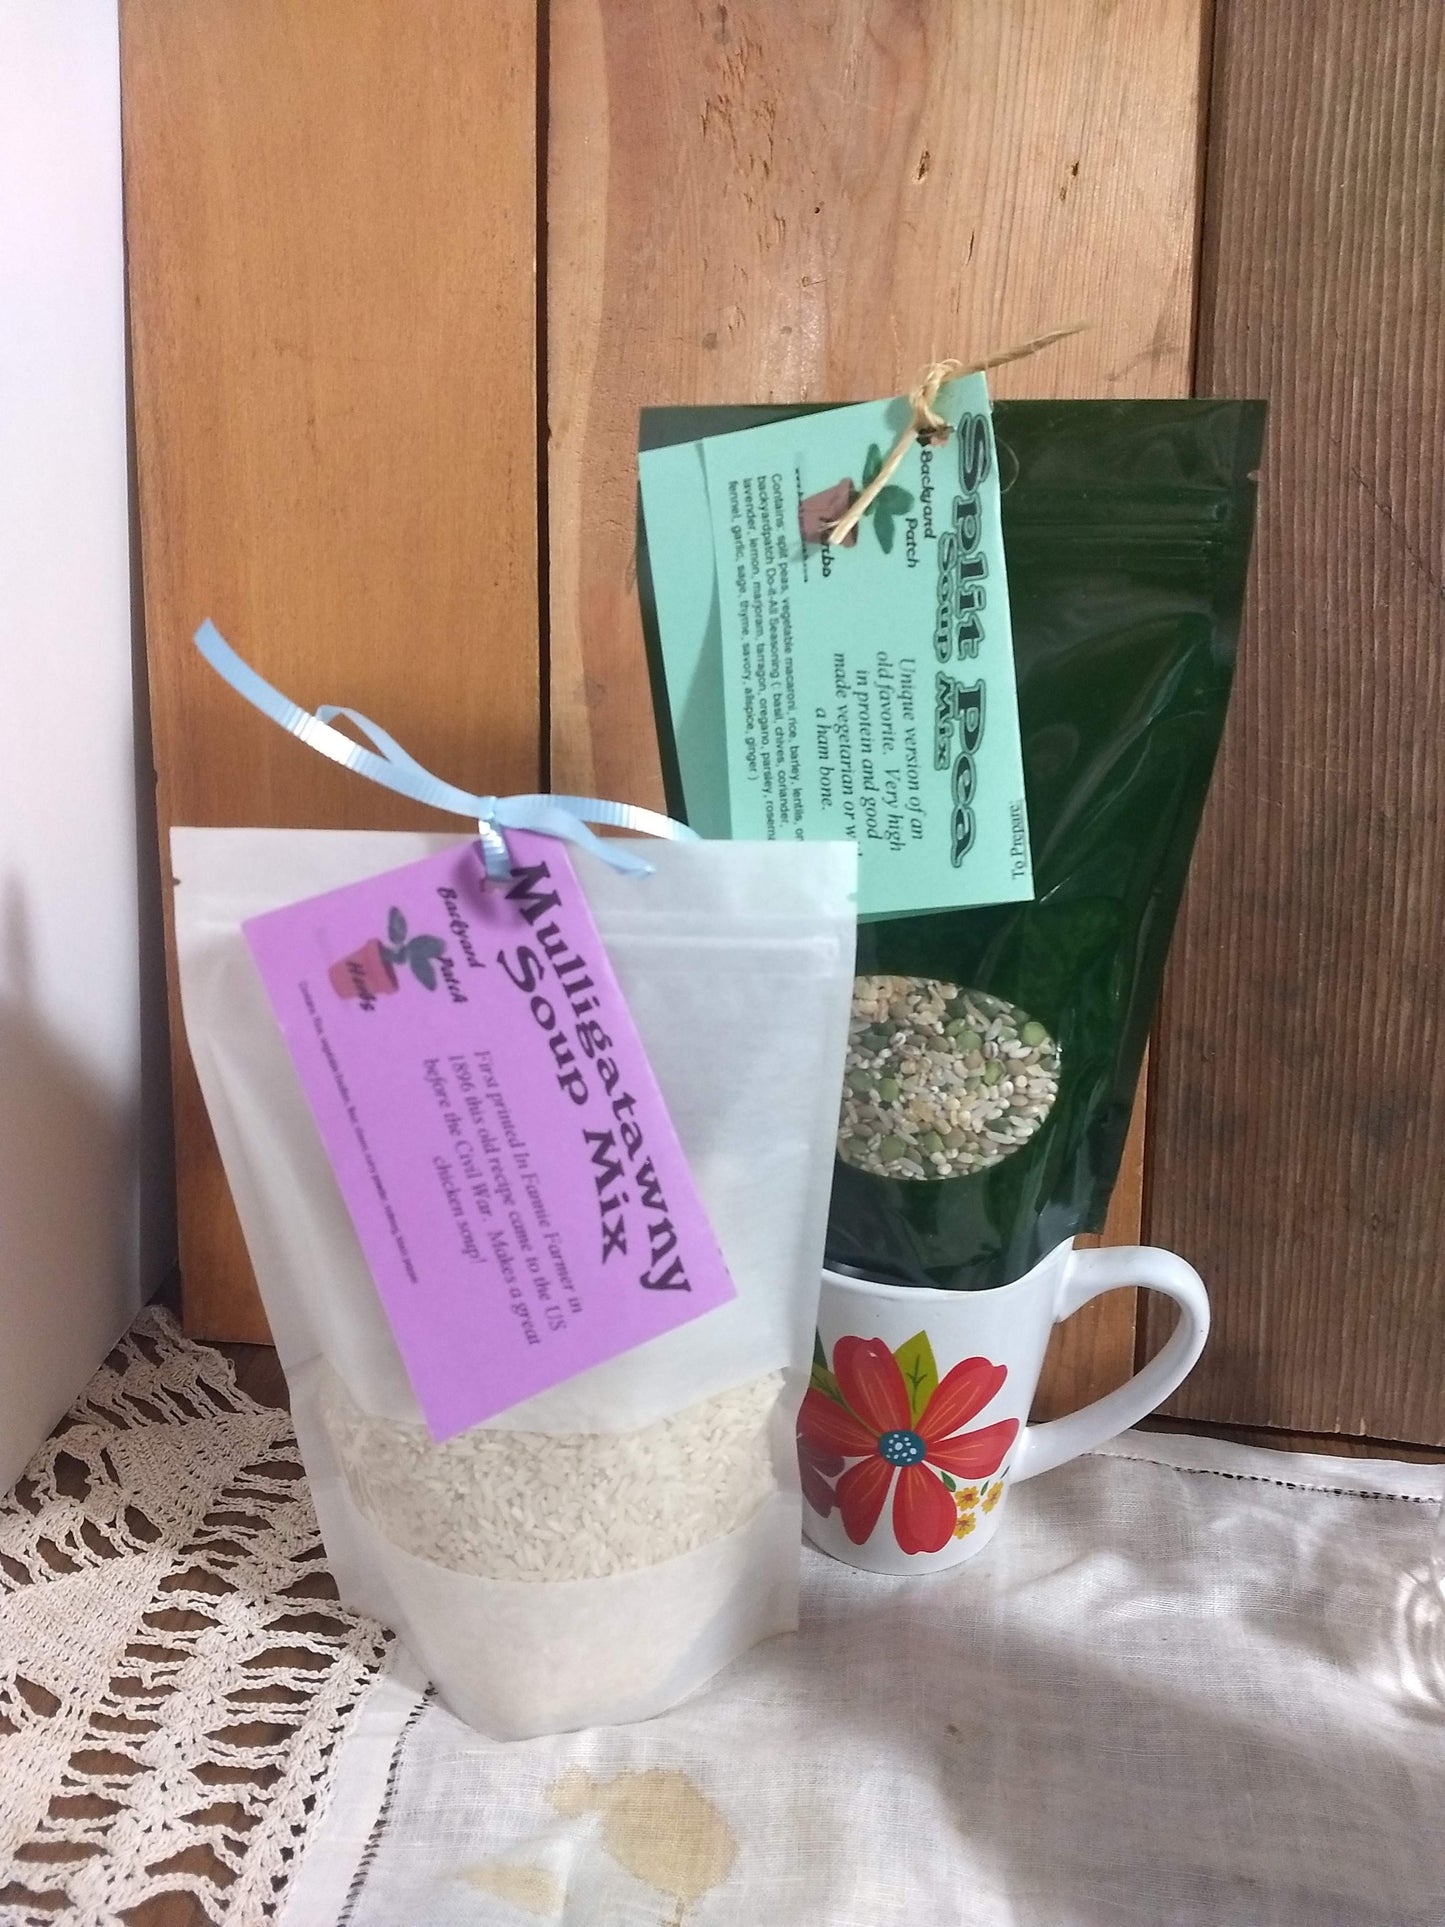 Mulligatawny Soup Mix, Gourmet Soup at home, dry mix with rice